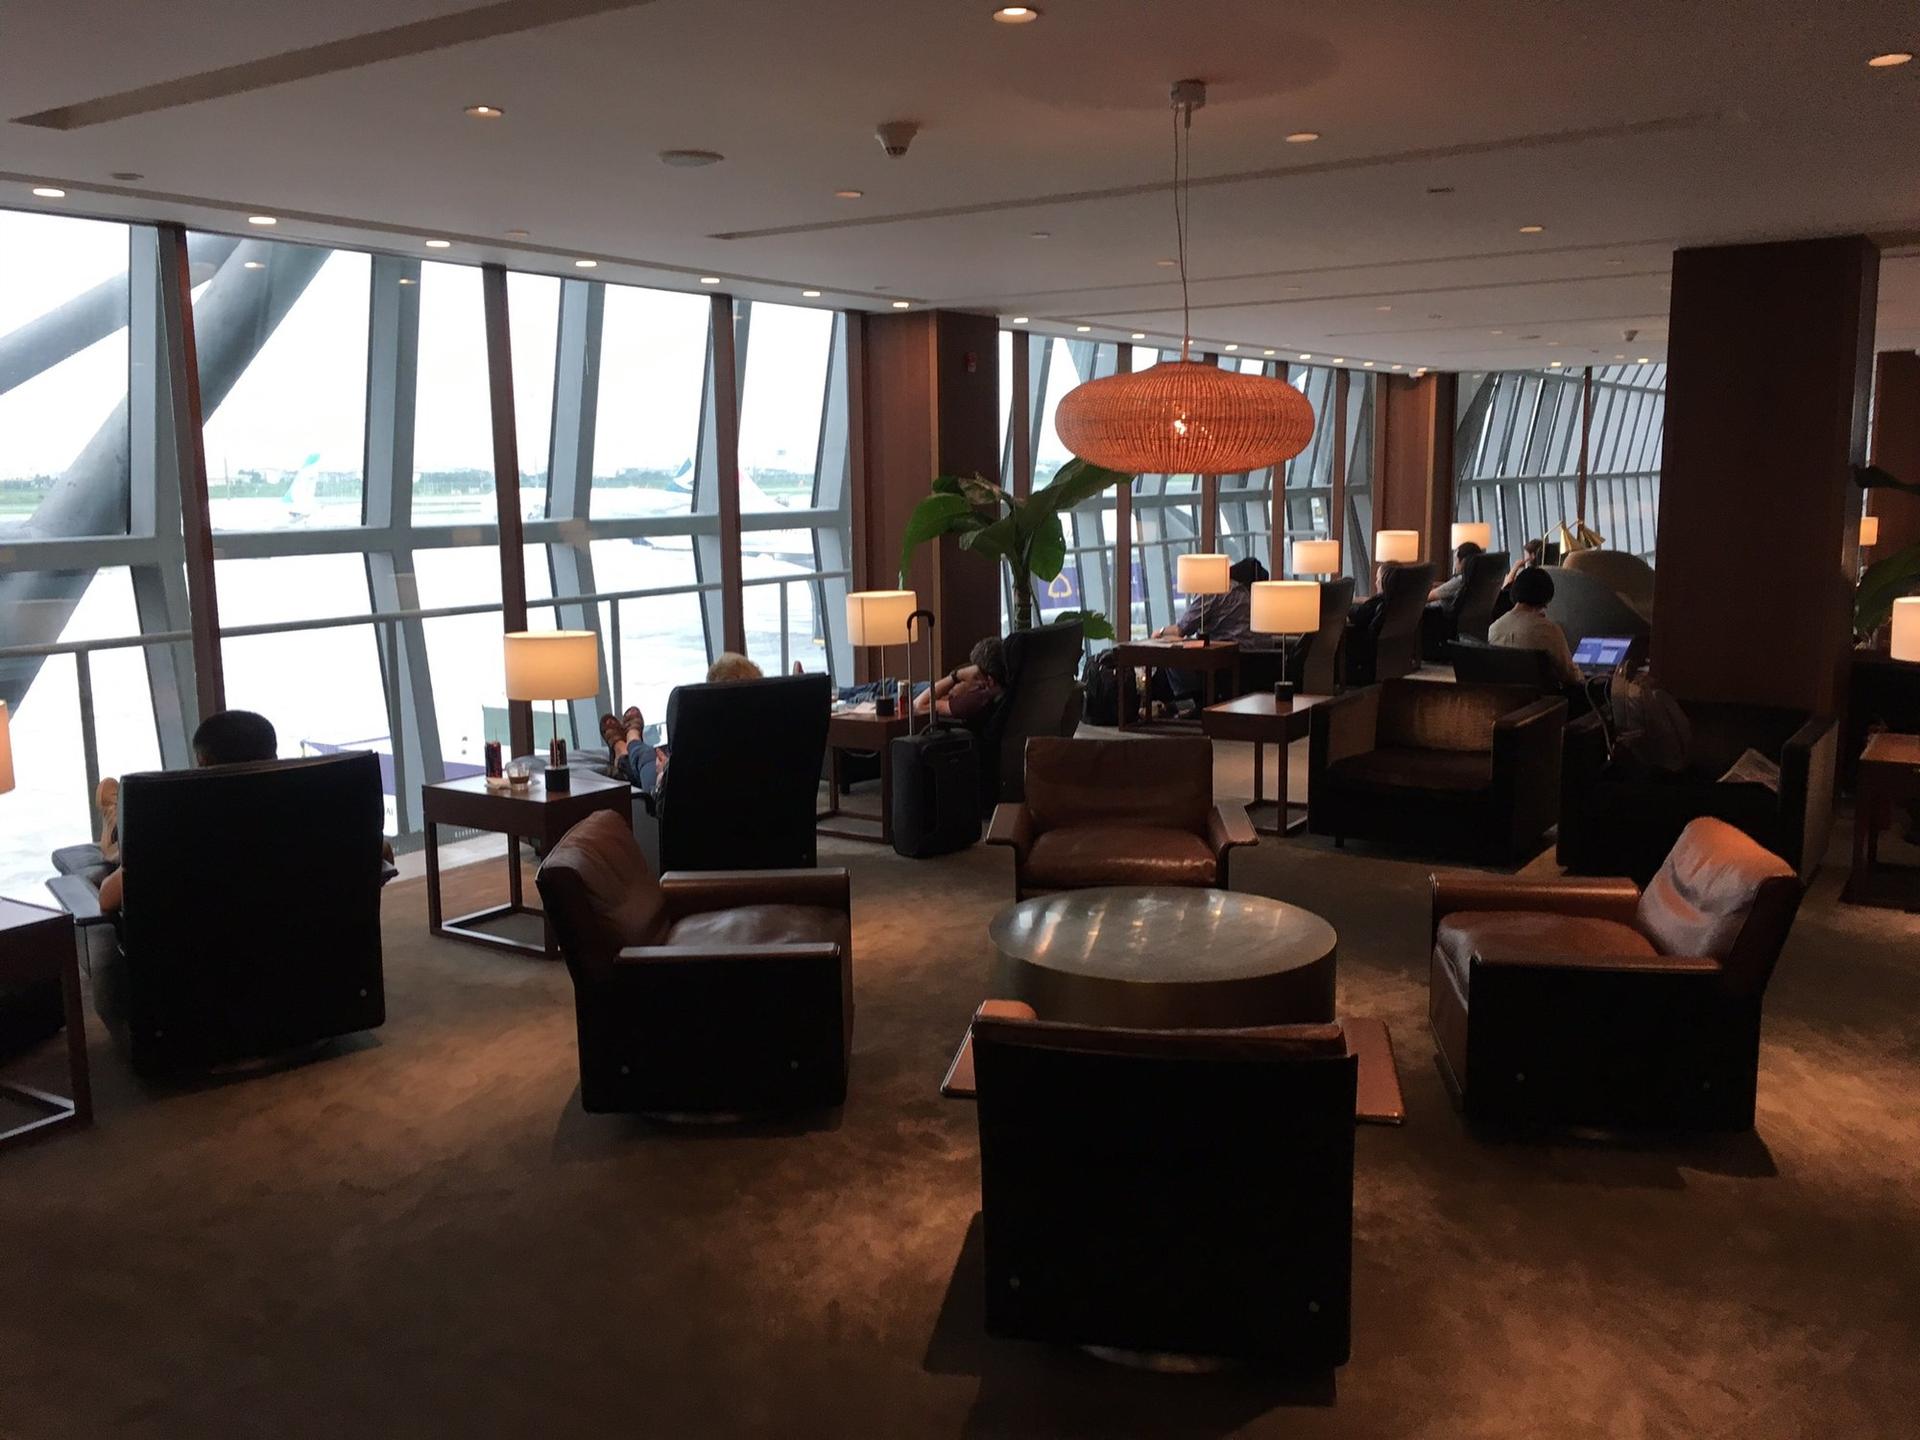 Cathay Pacific First and Business Class Lounge image 46 of 69